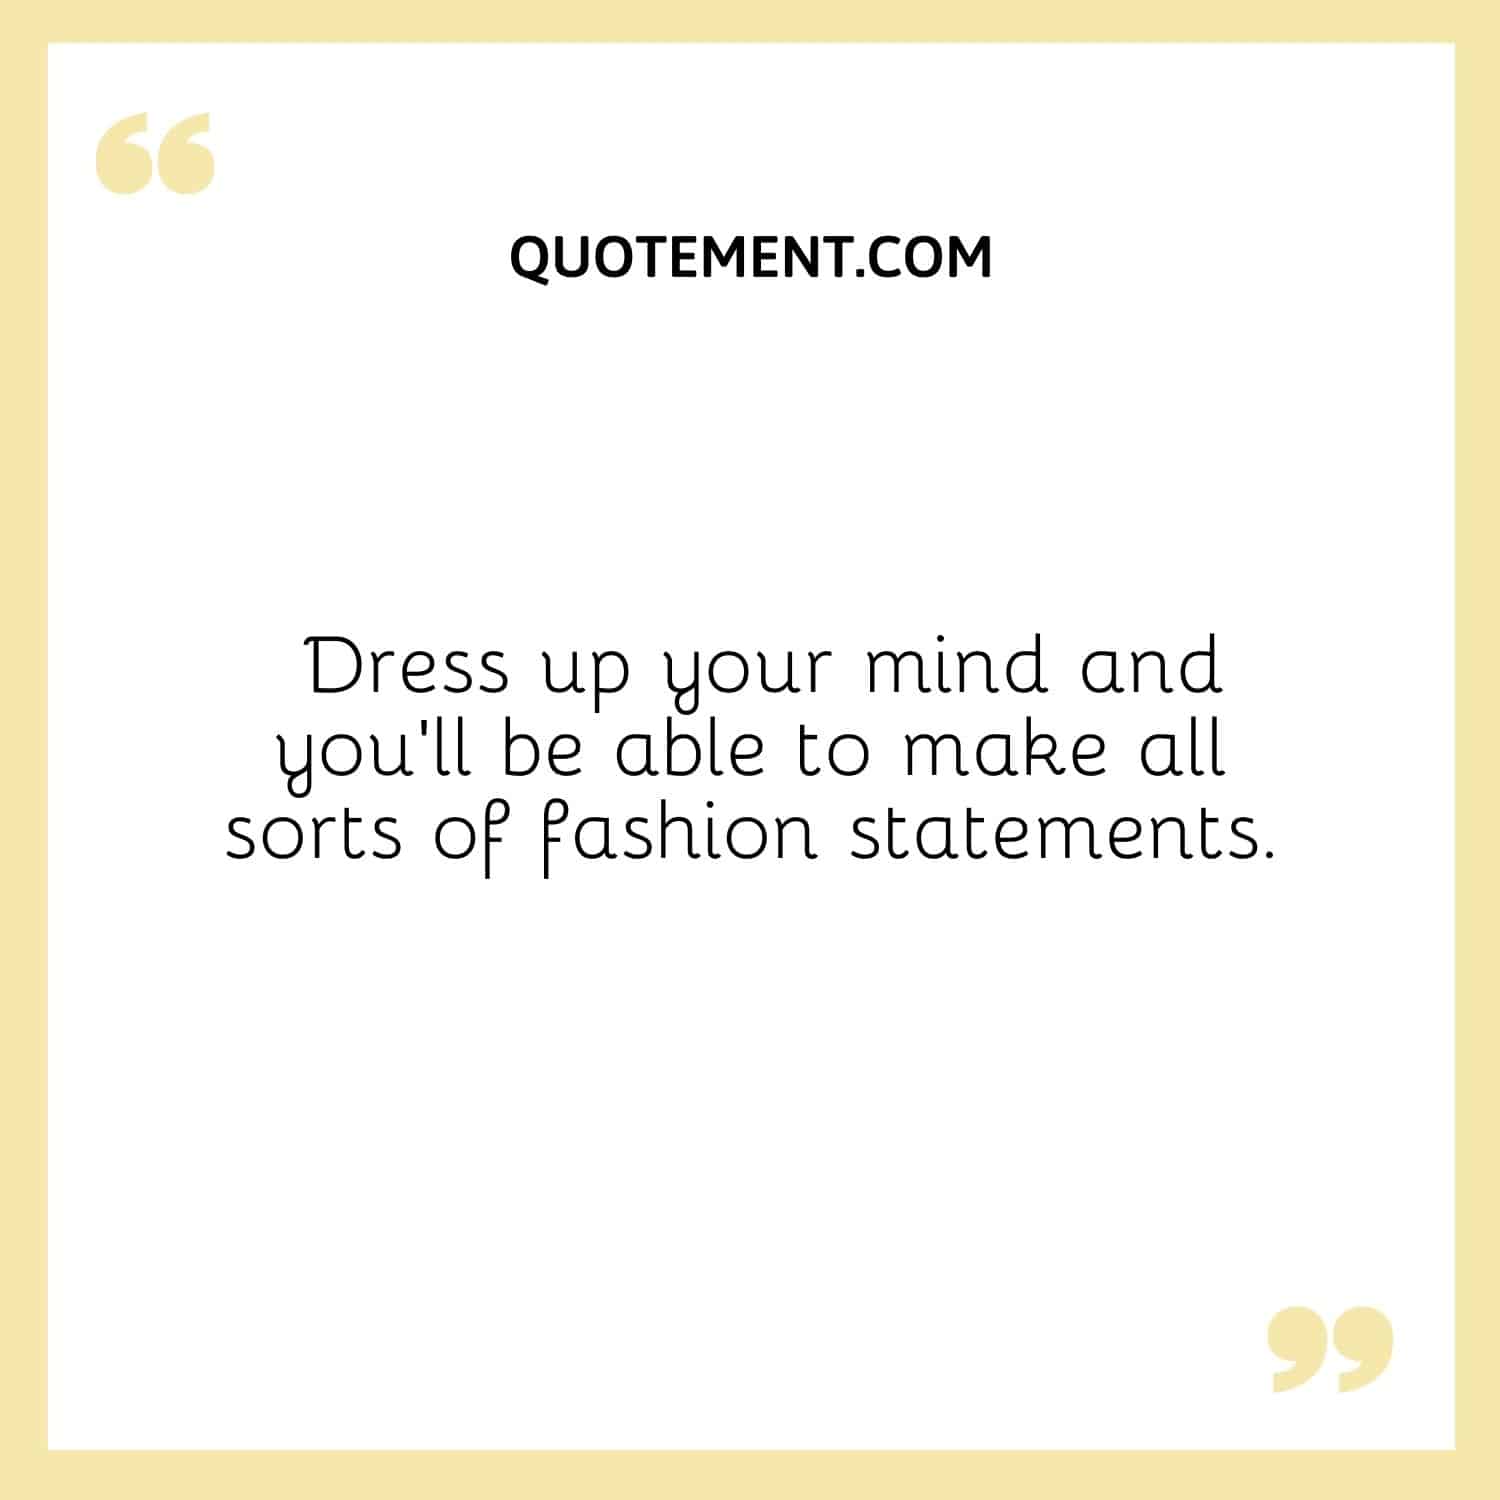 Dress up your mind and you’ll be able to make all sorts of fashion statements.